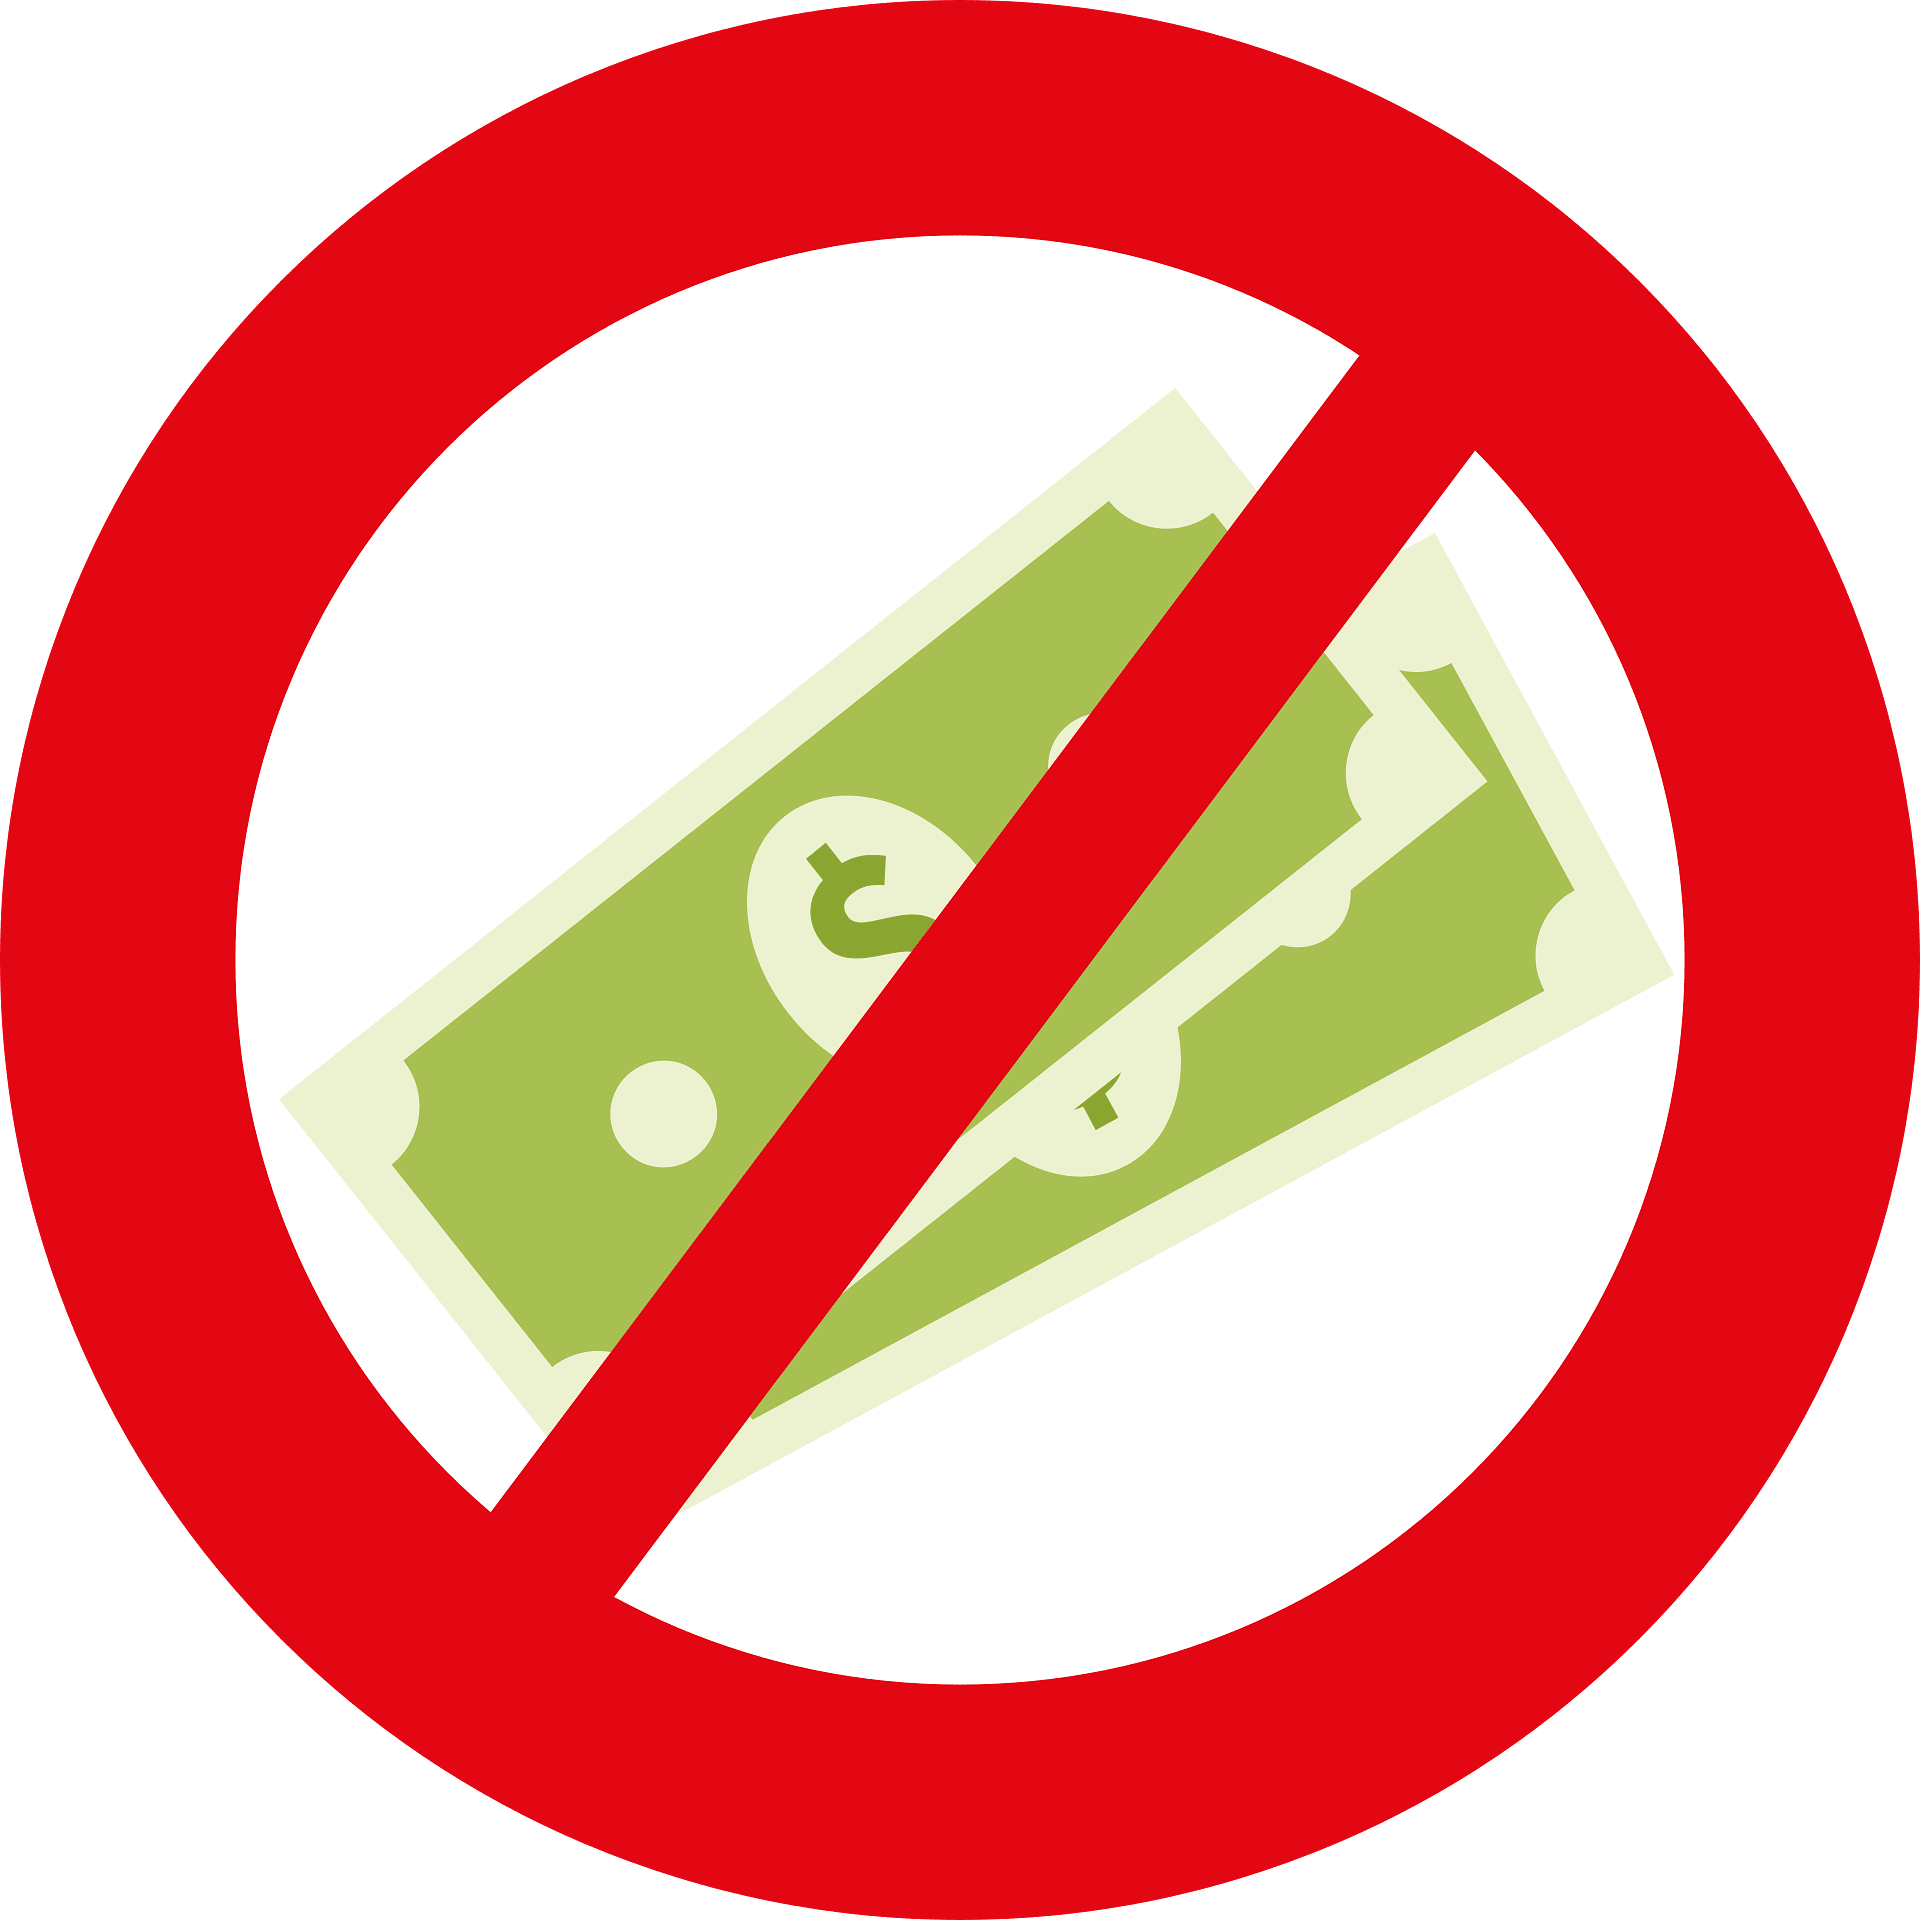 cash-signs-clip-art-library